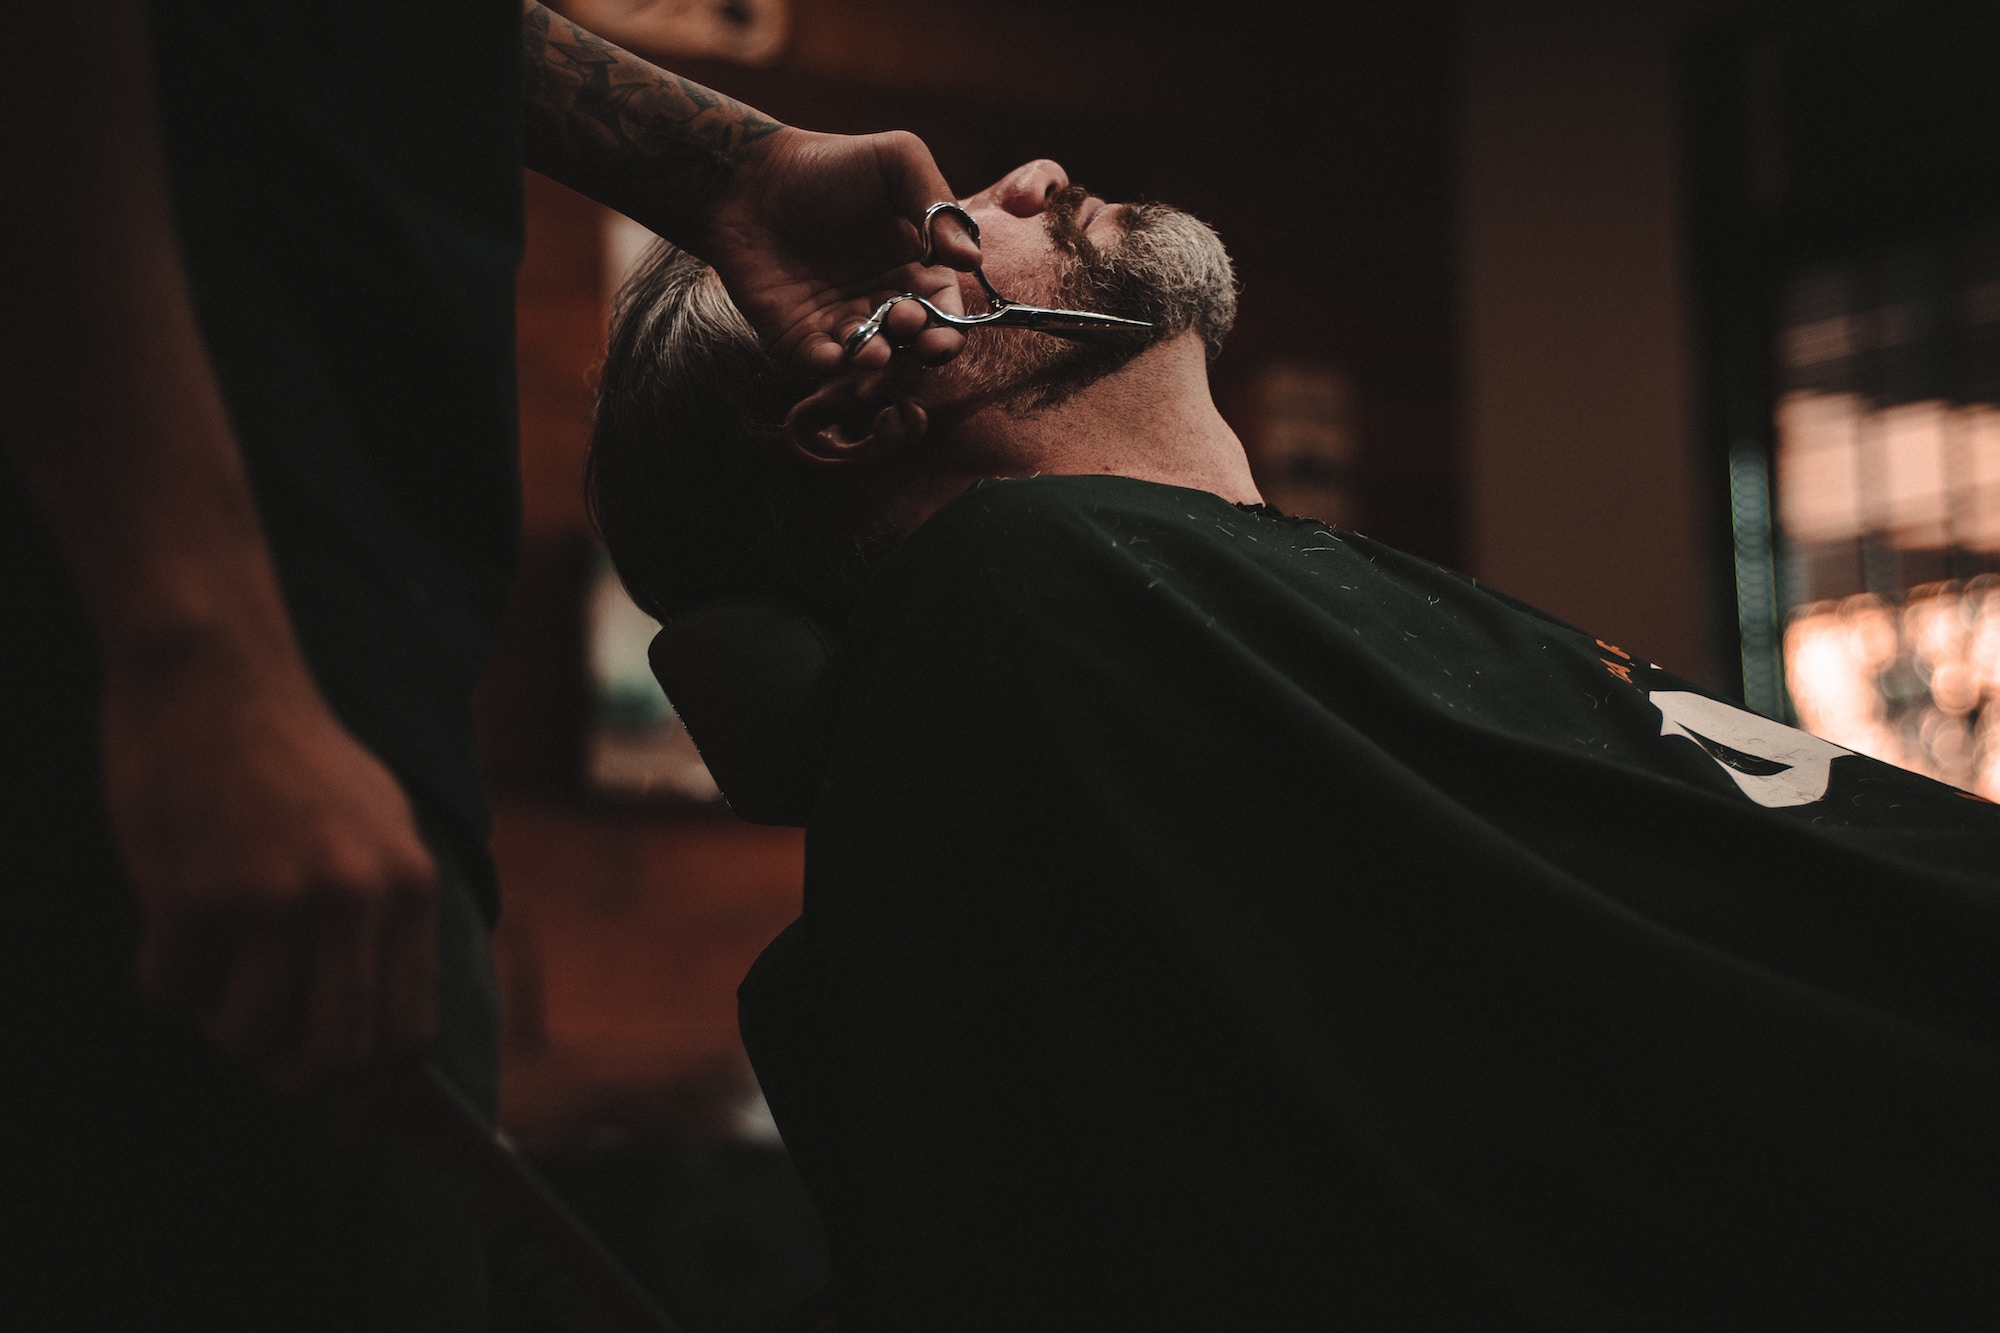 Boys don't cry: Talking mental health in the barbershop